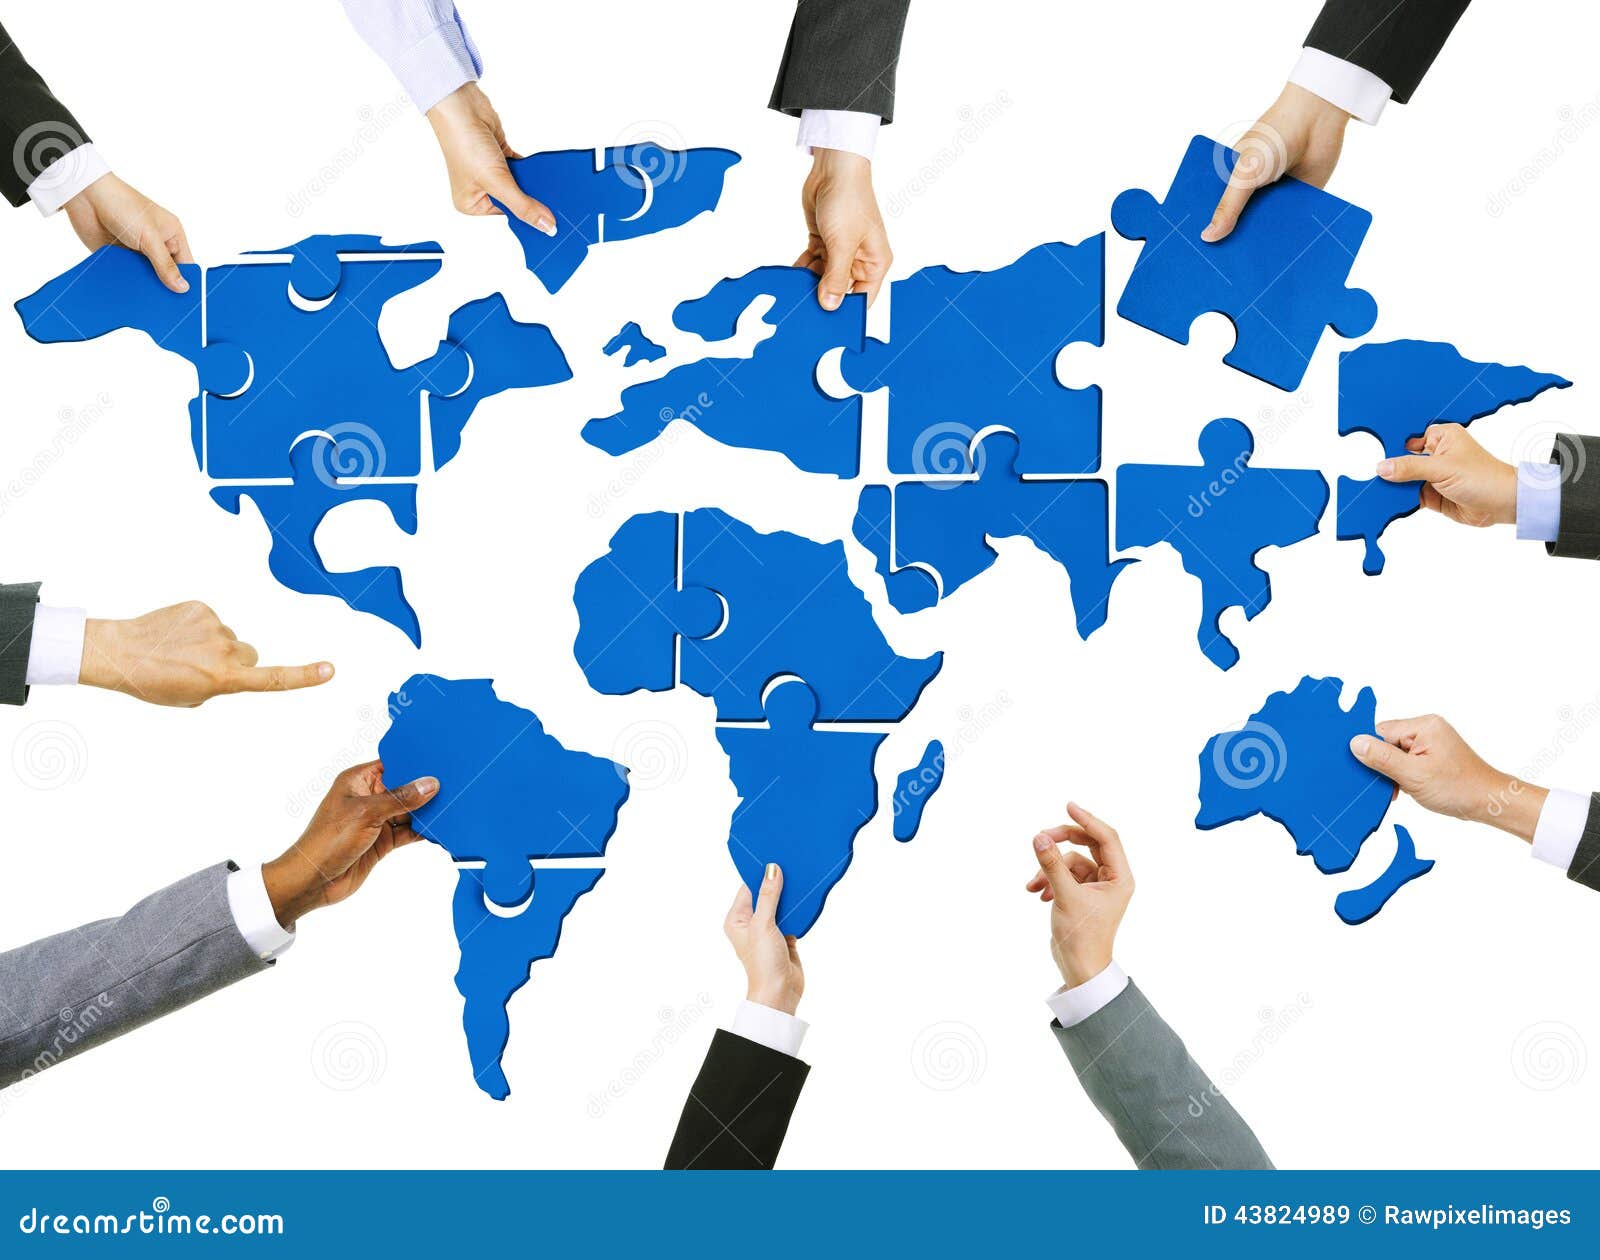 business people's hands with cartography puzzle